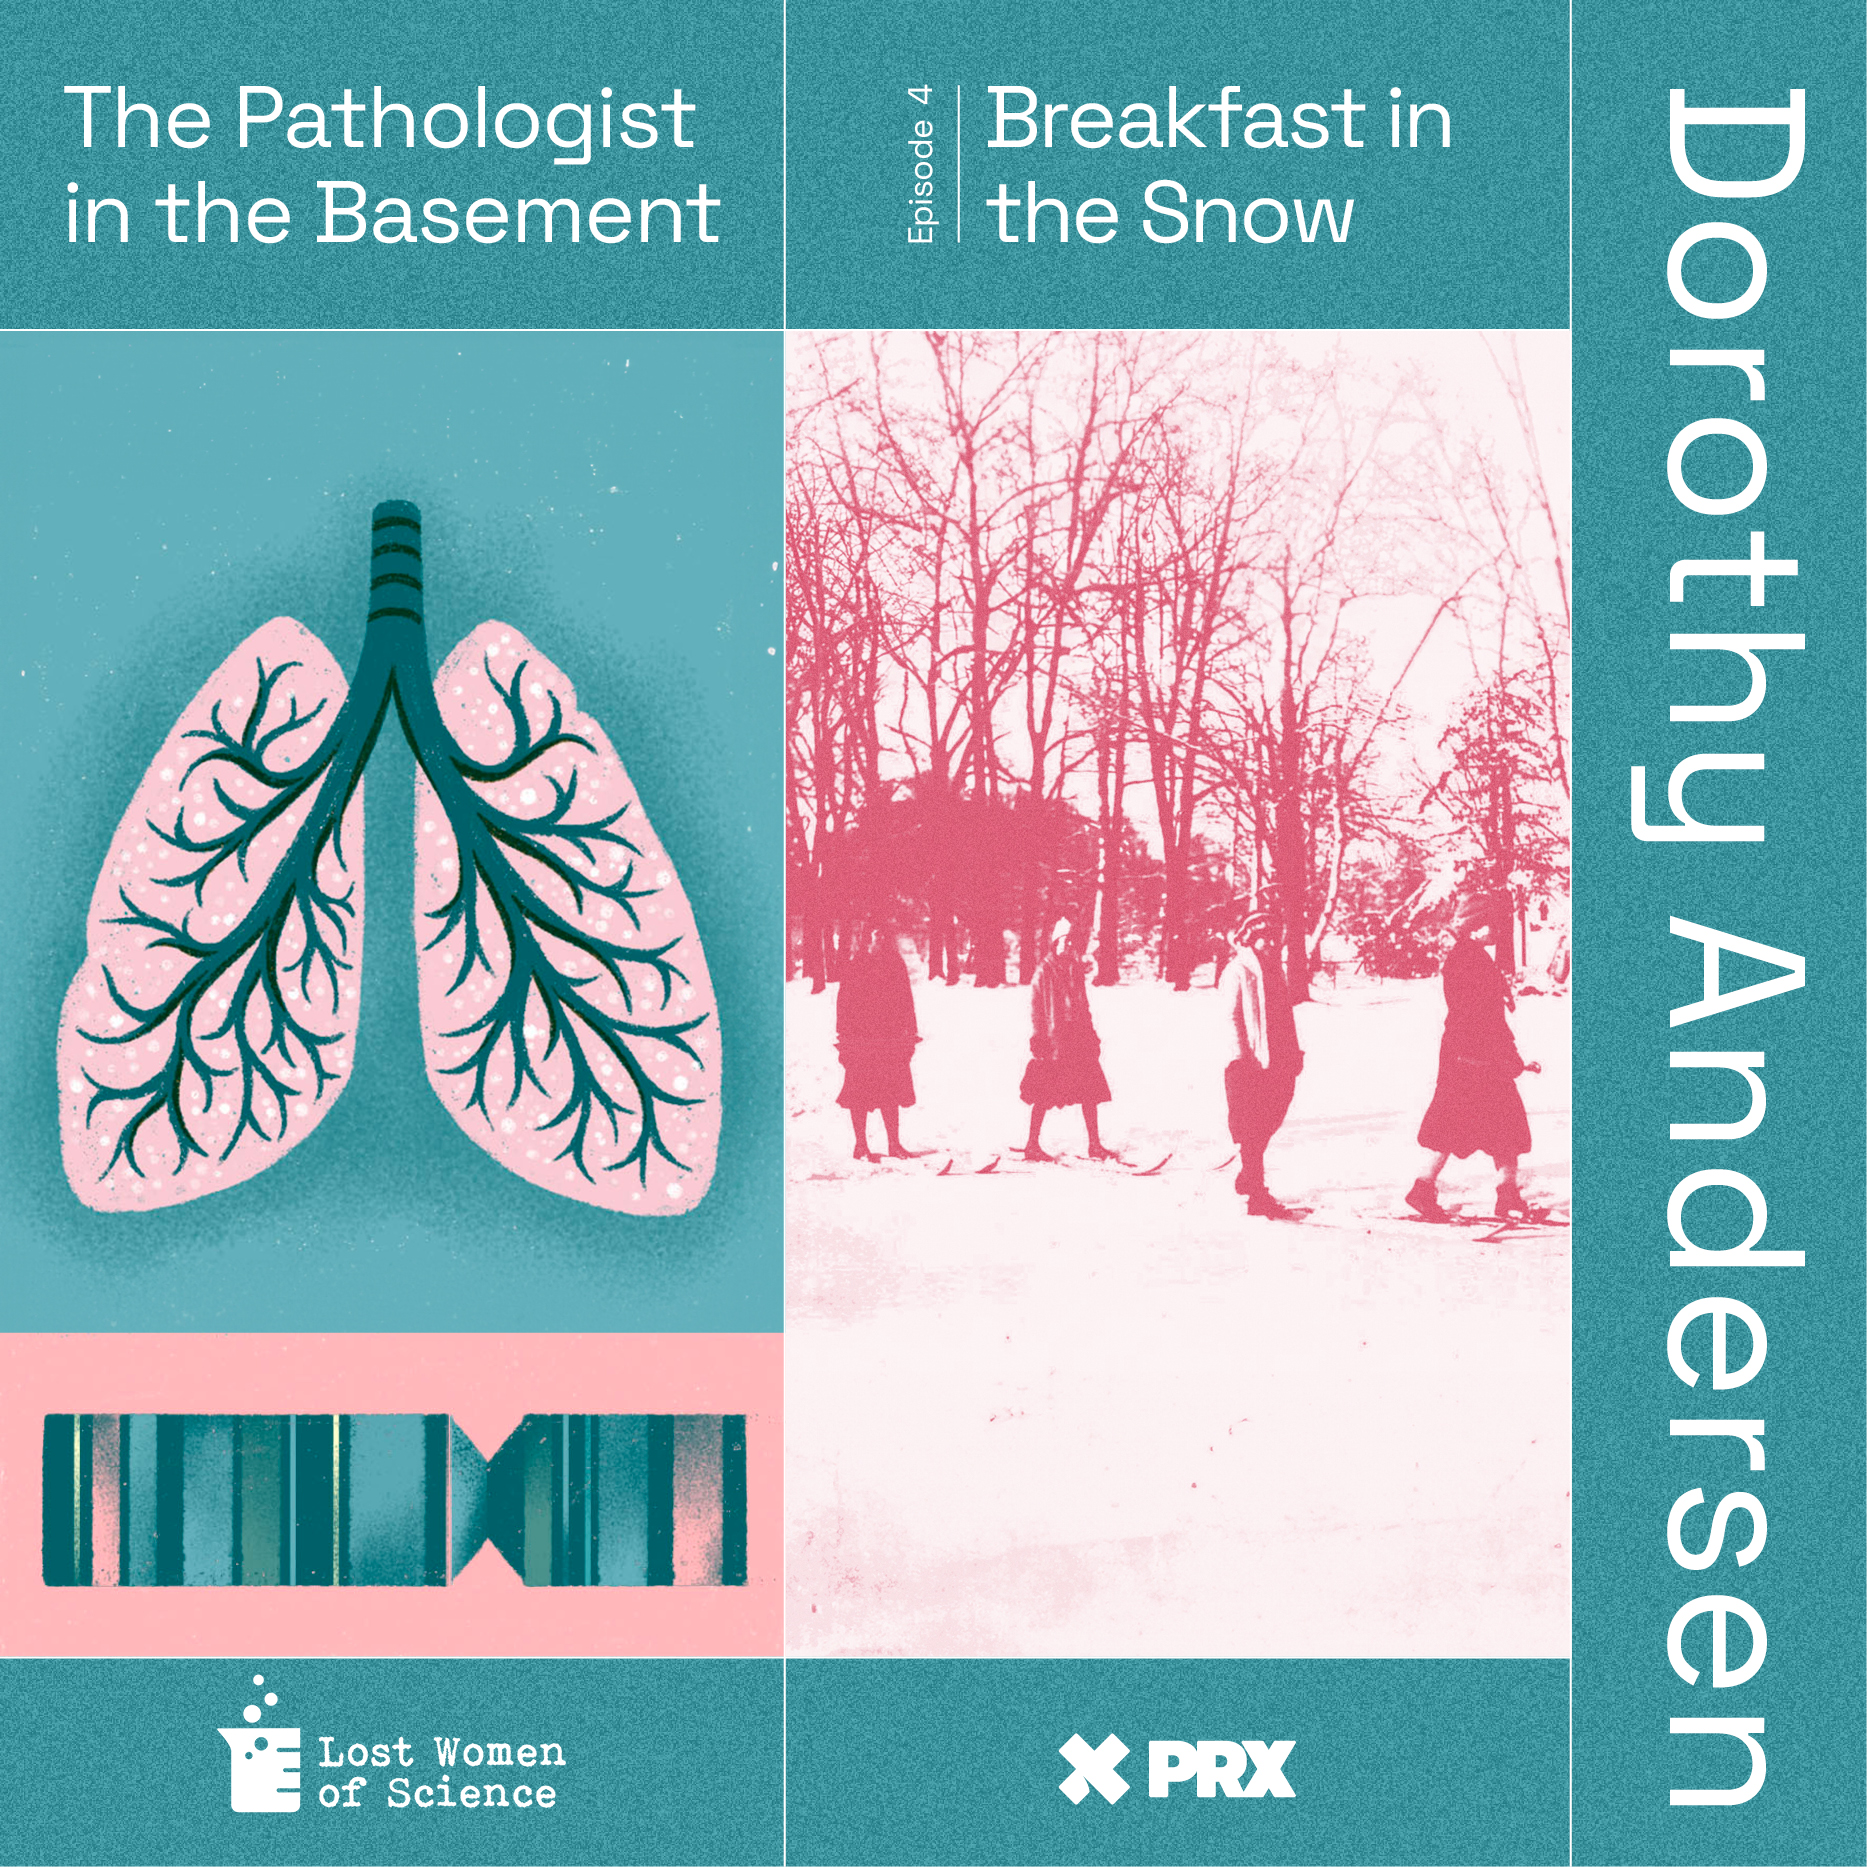 Thumbnail for "Revisiting The Pathologist in the Basement: Episode 4 Breakfast in the Snow".